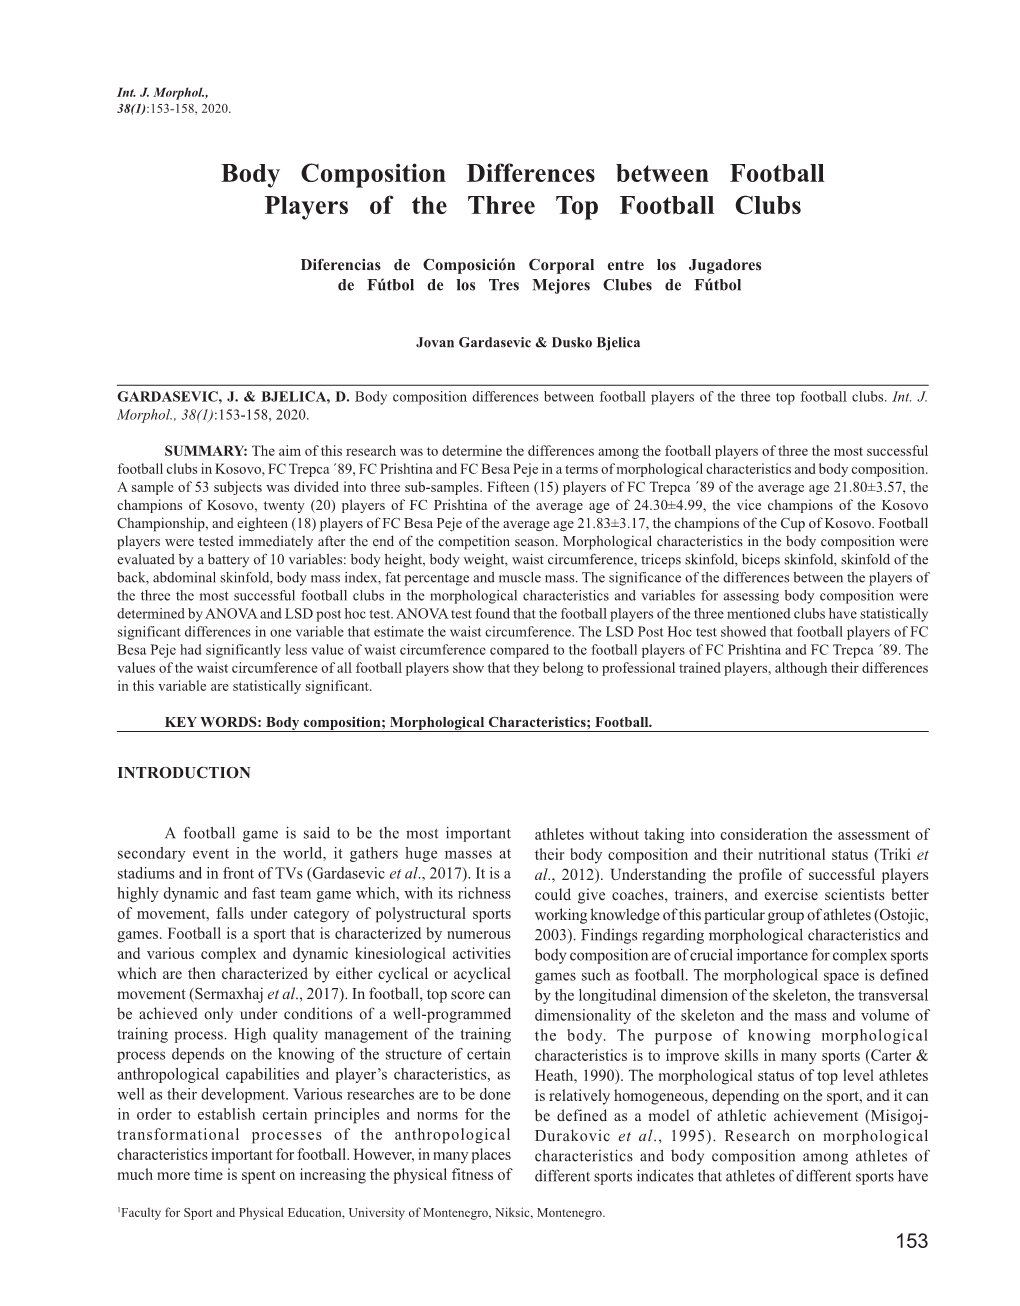 Body Composition Differences Between Football Players of the Three Top Football Clubs